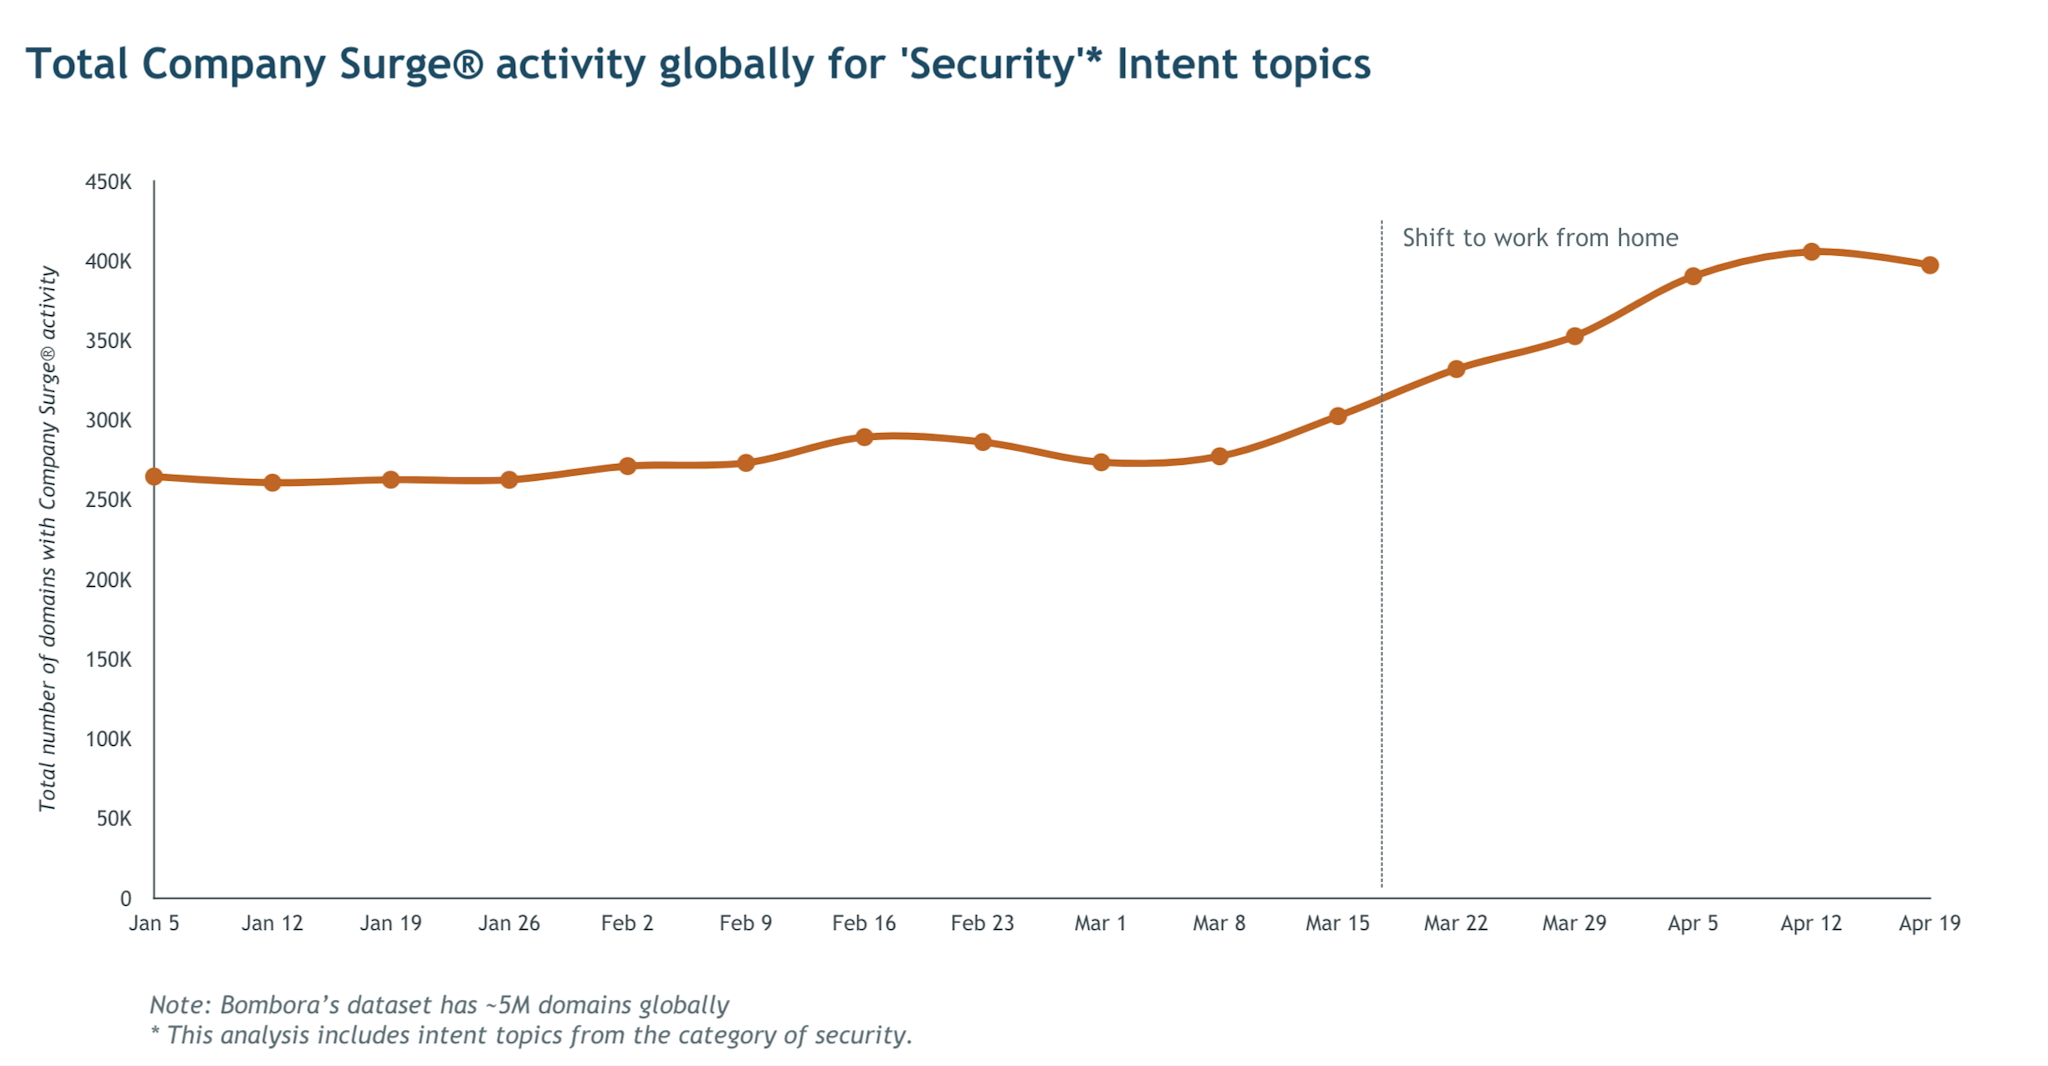 A line graph showing the total company surge activity globally for "security" intent topics